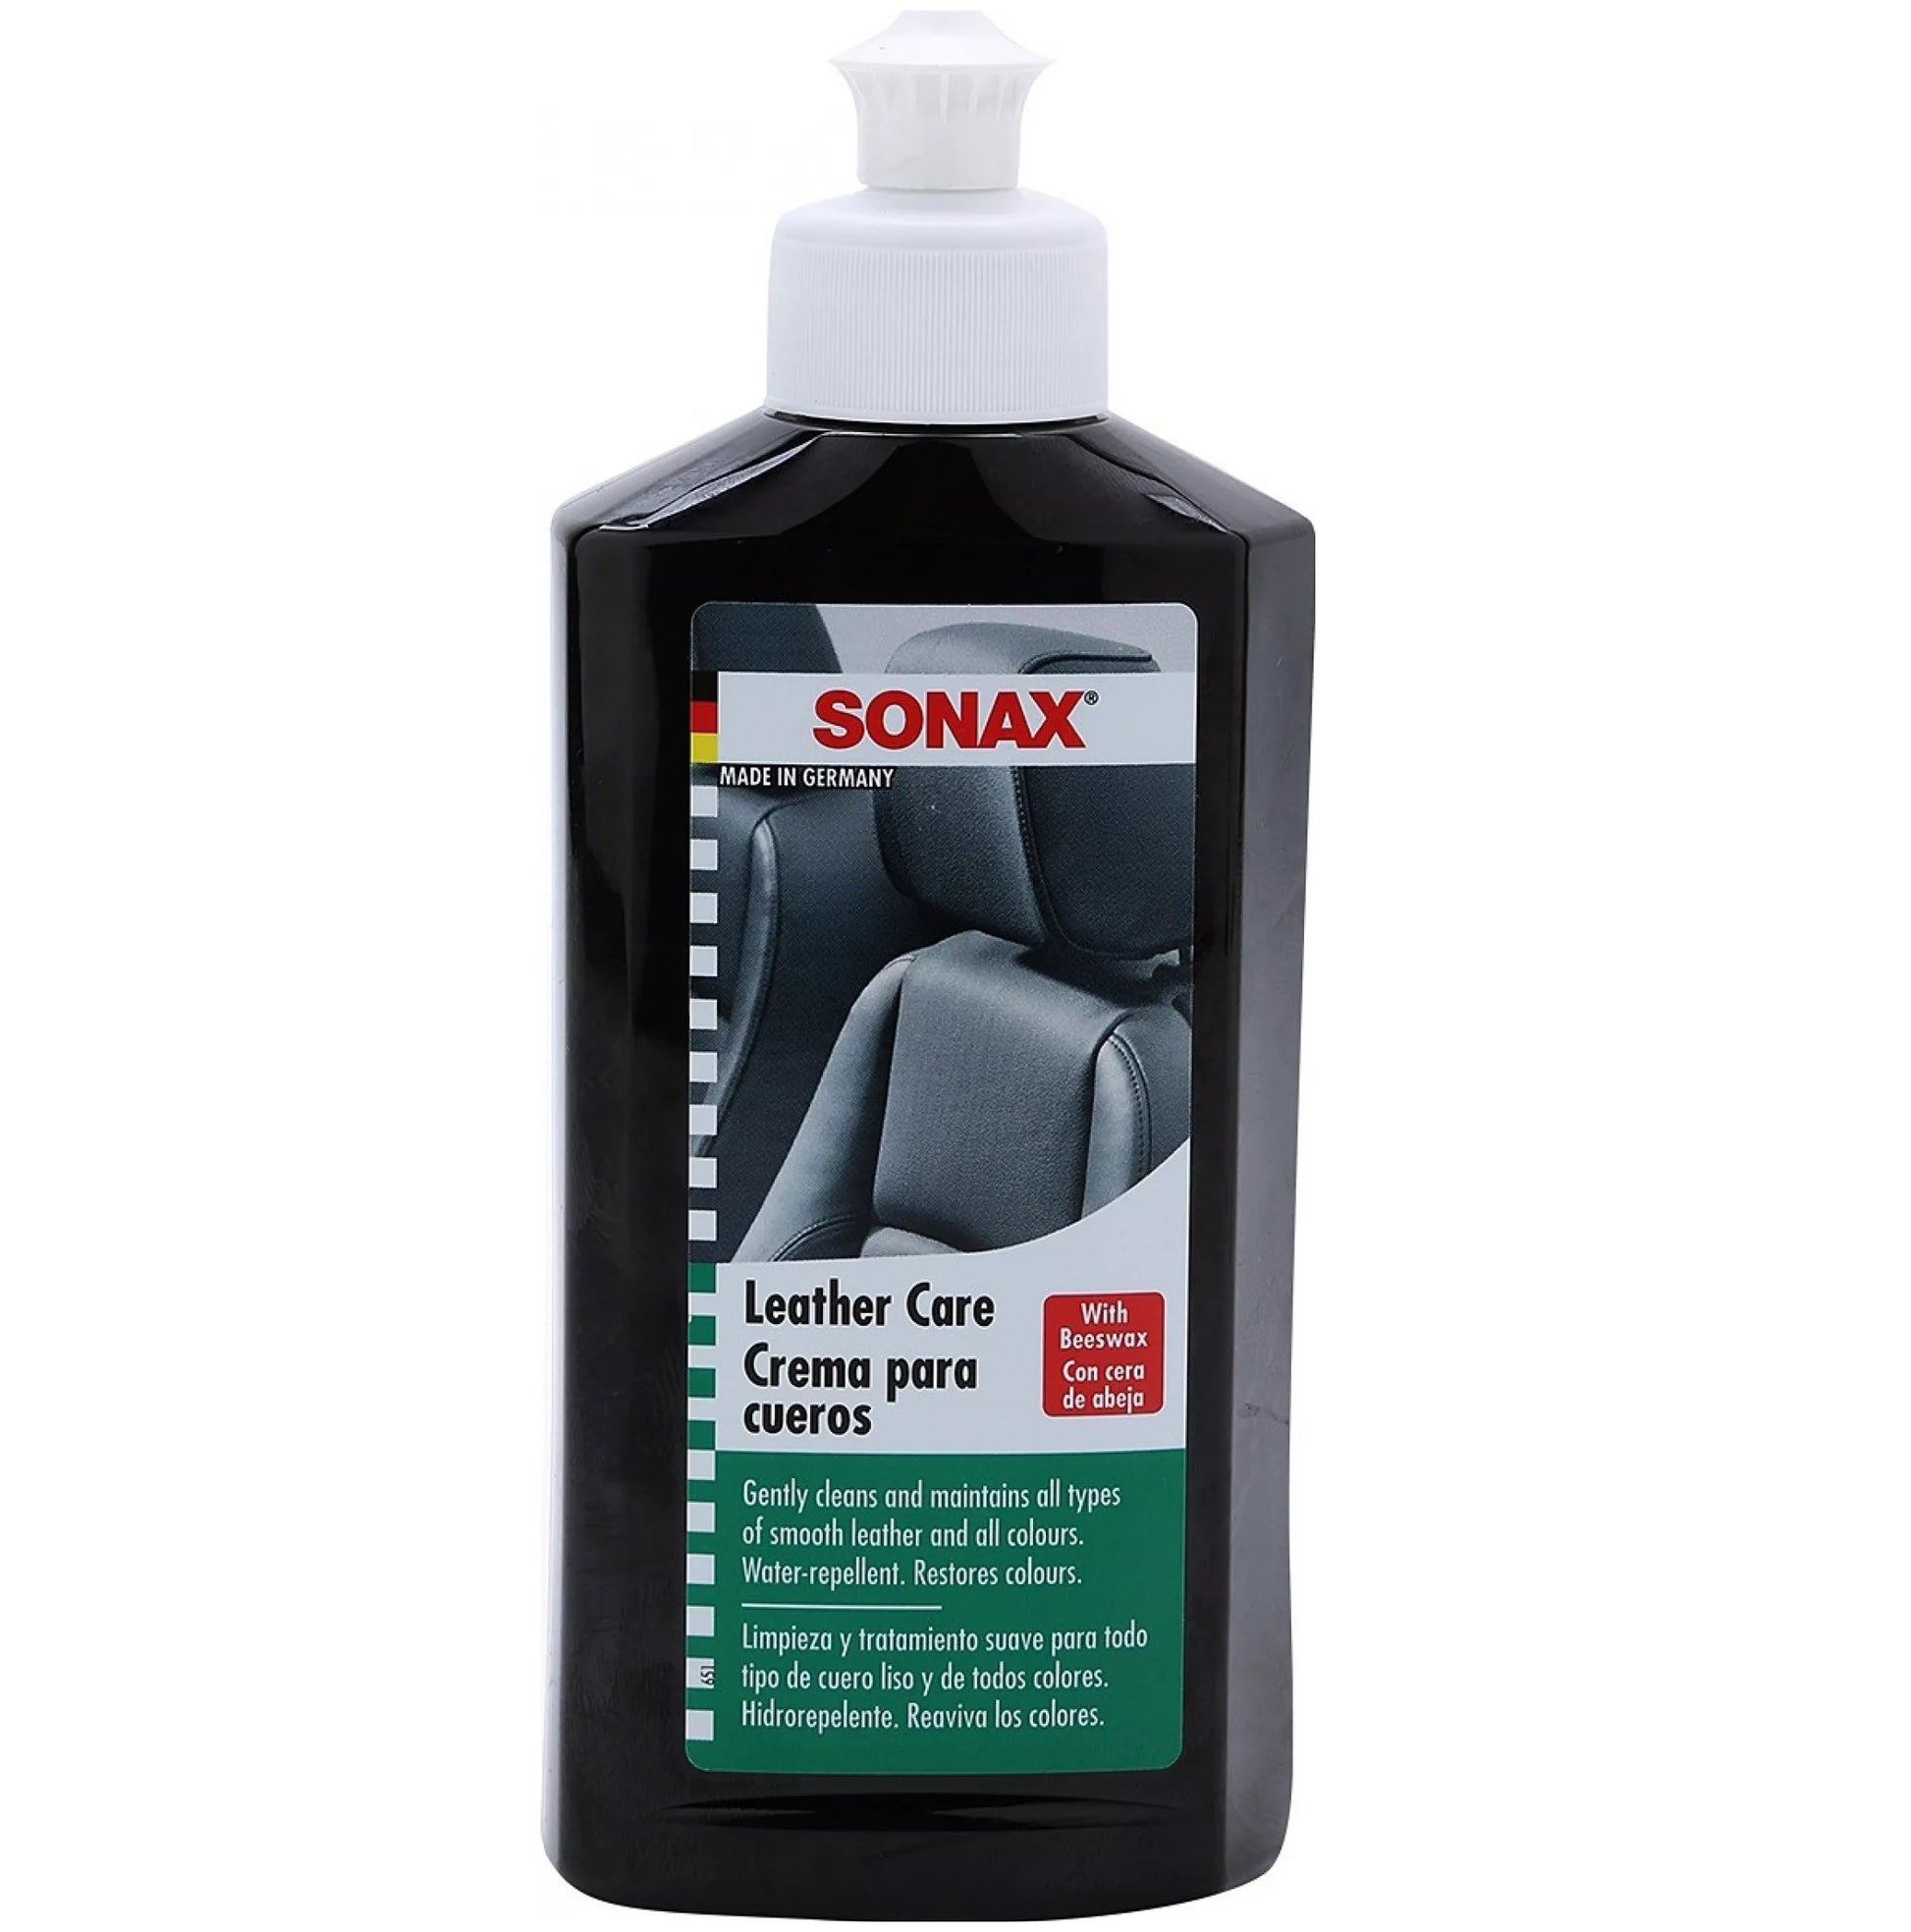 SONAX Car-Care Product SALES